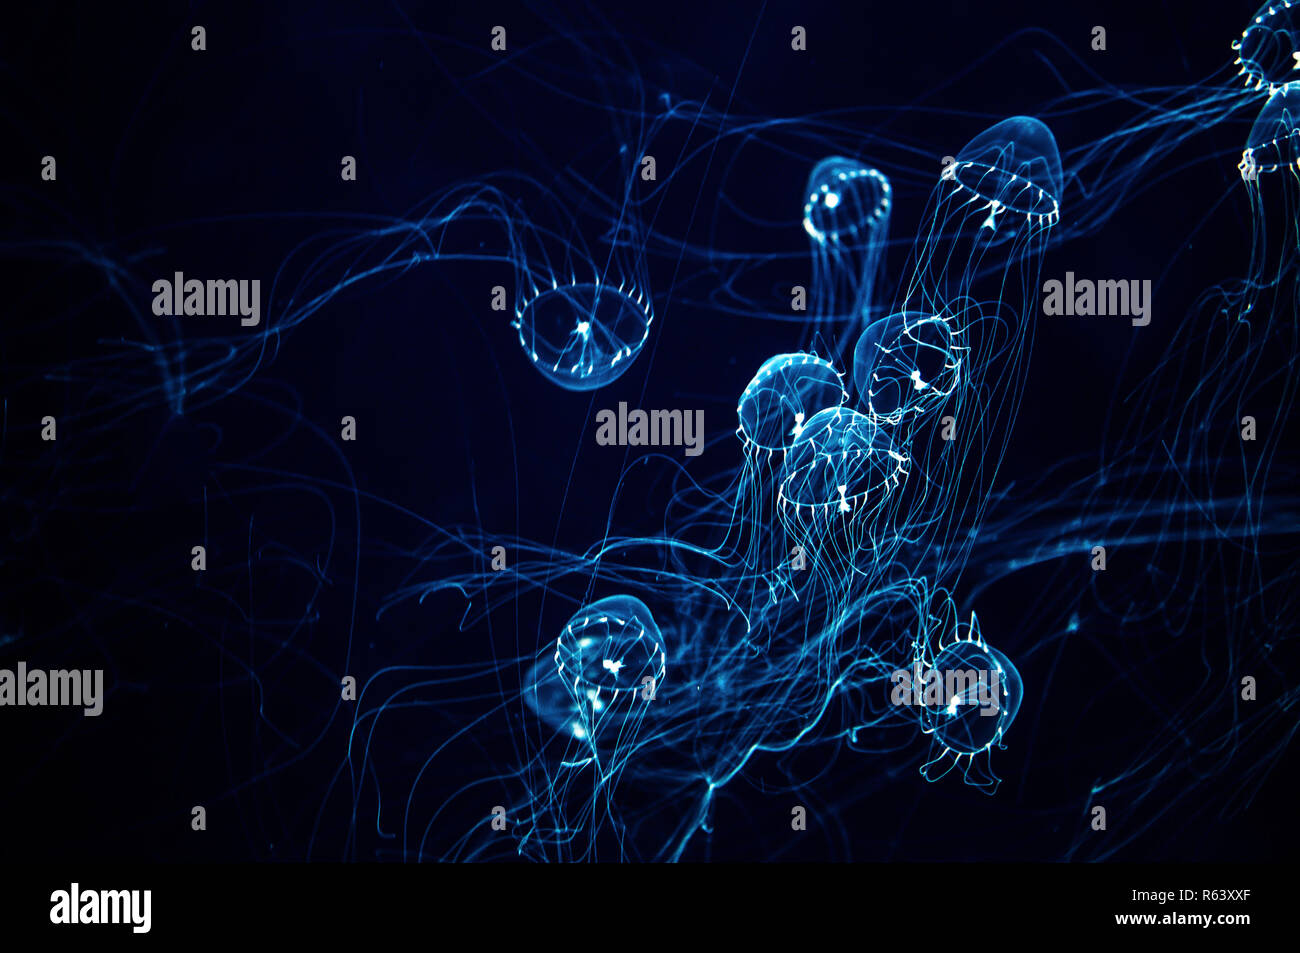 Transparent, glow in the dark jellyfish with long tentacles Stock Photo